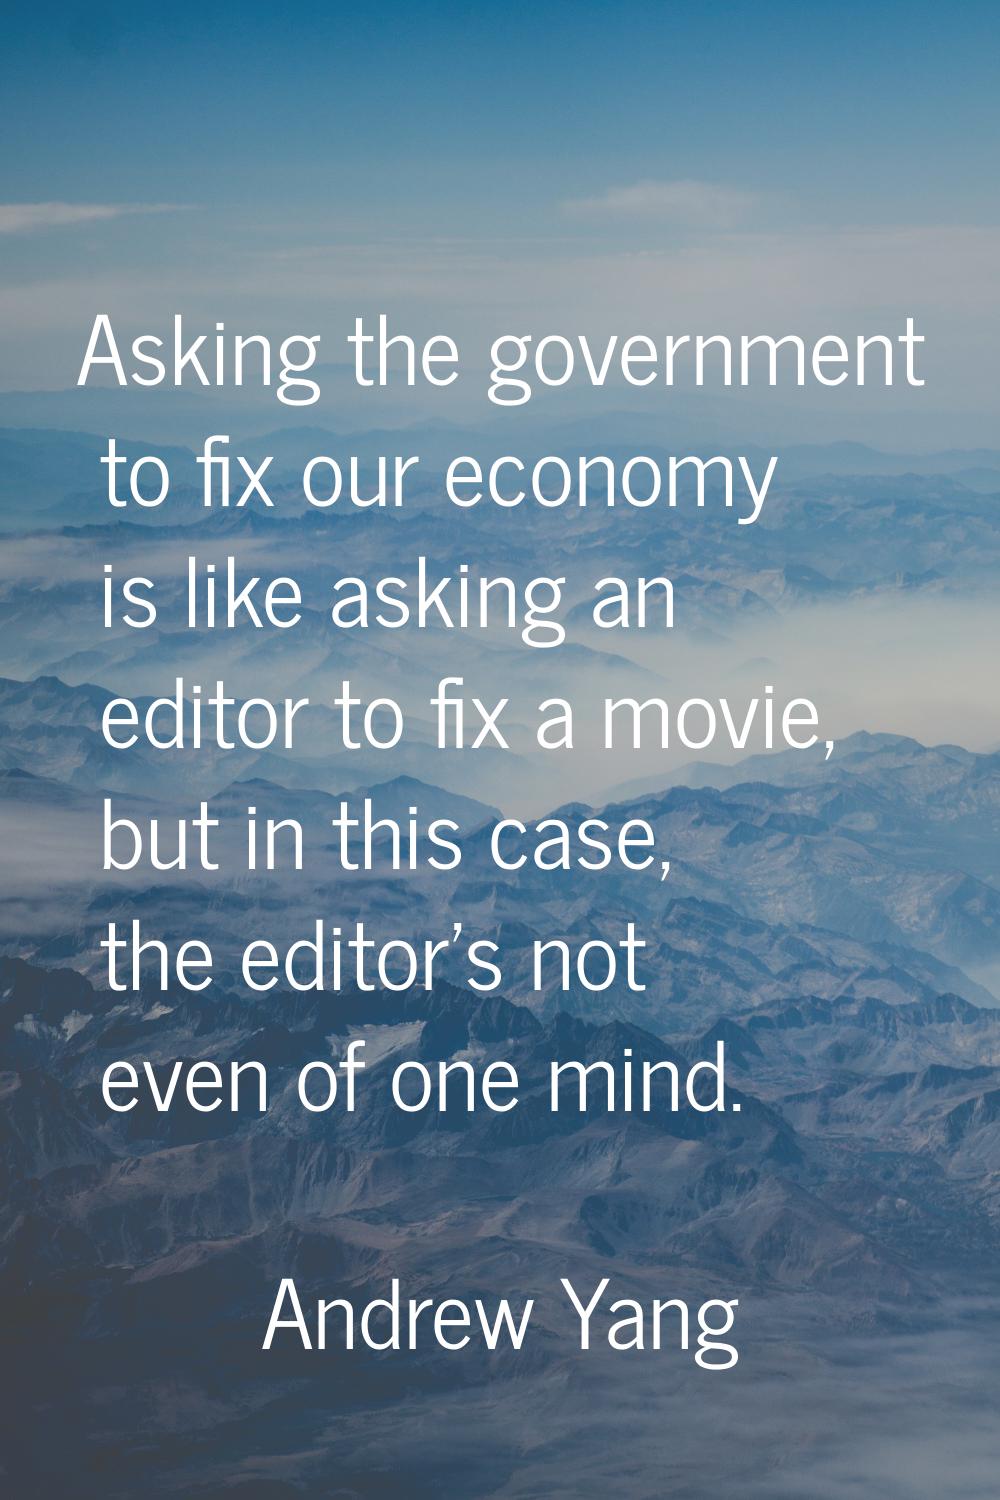 Asking the government to fix our economy is like asking an editor to fix a movie, but in this case,